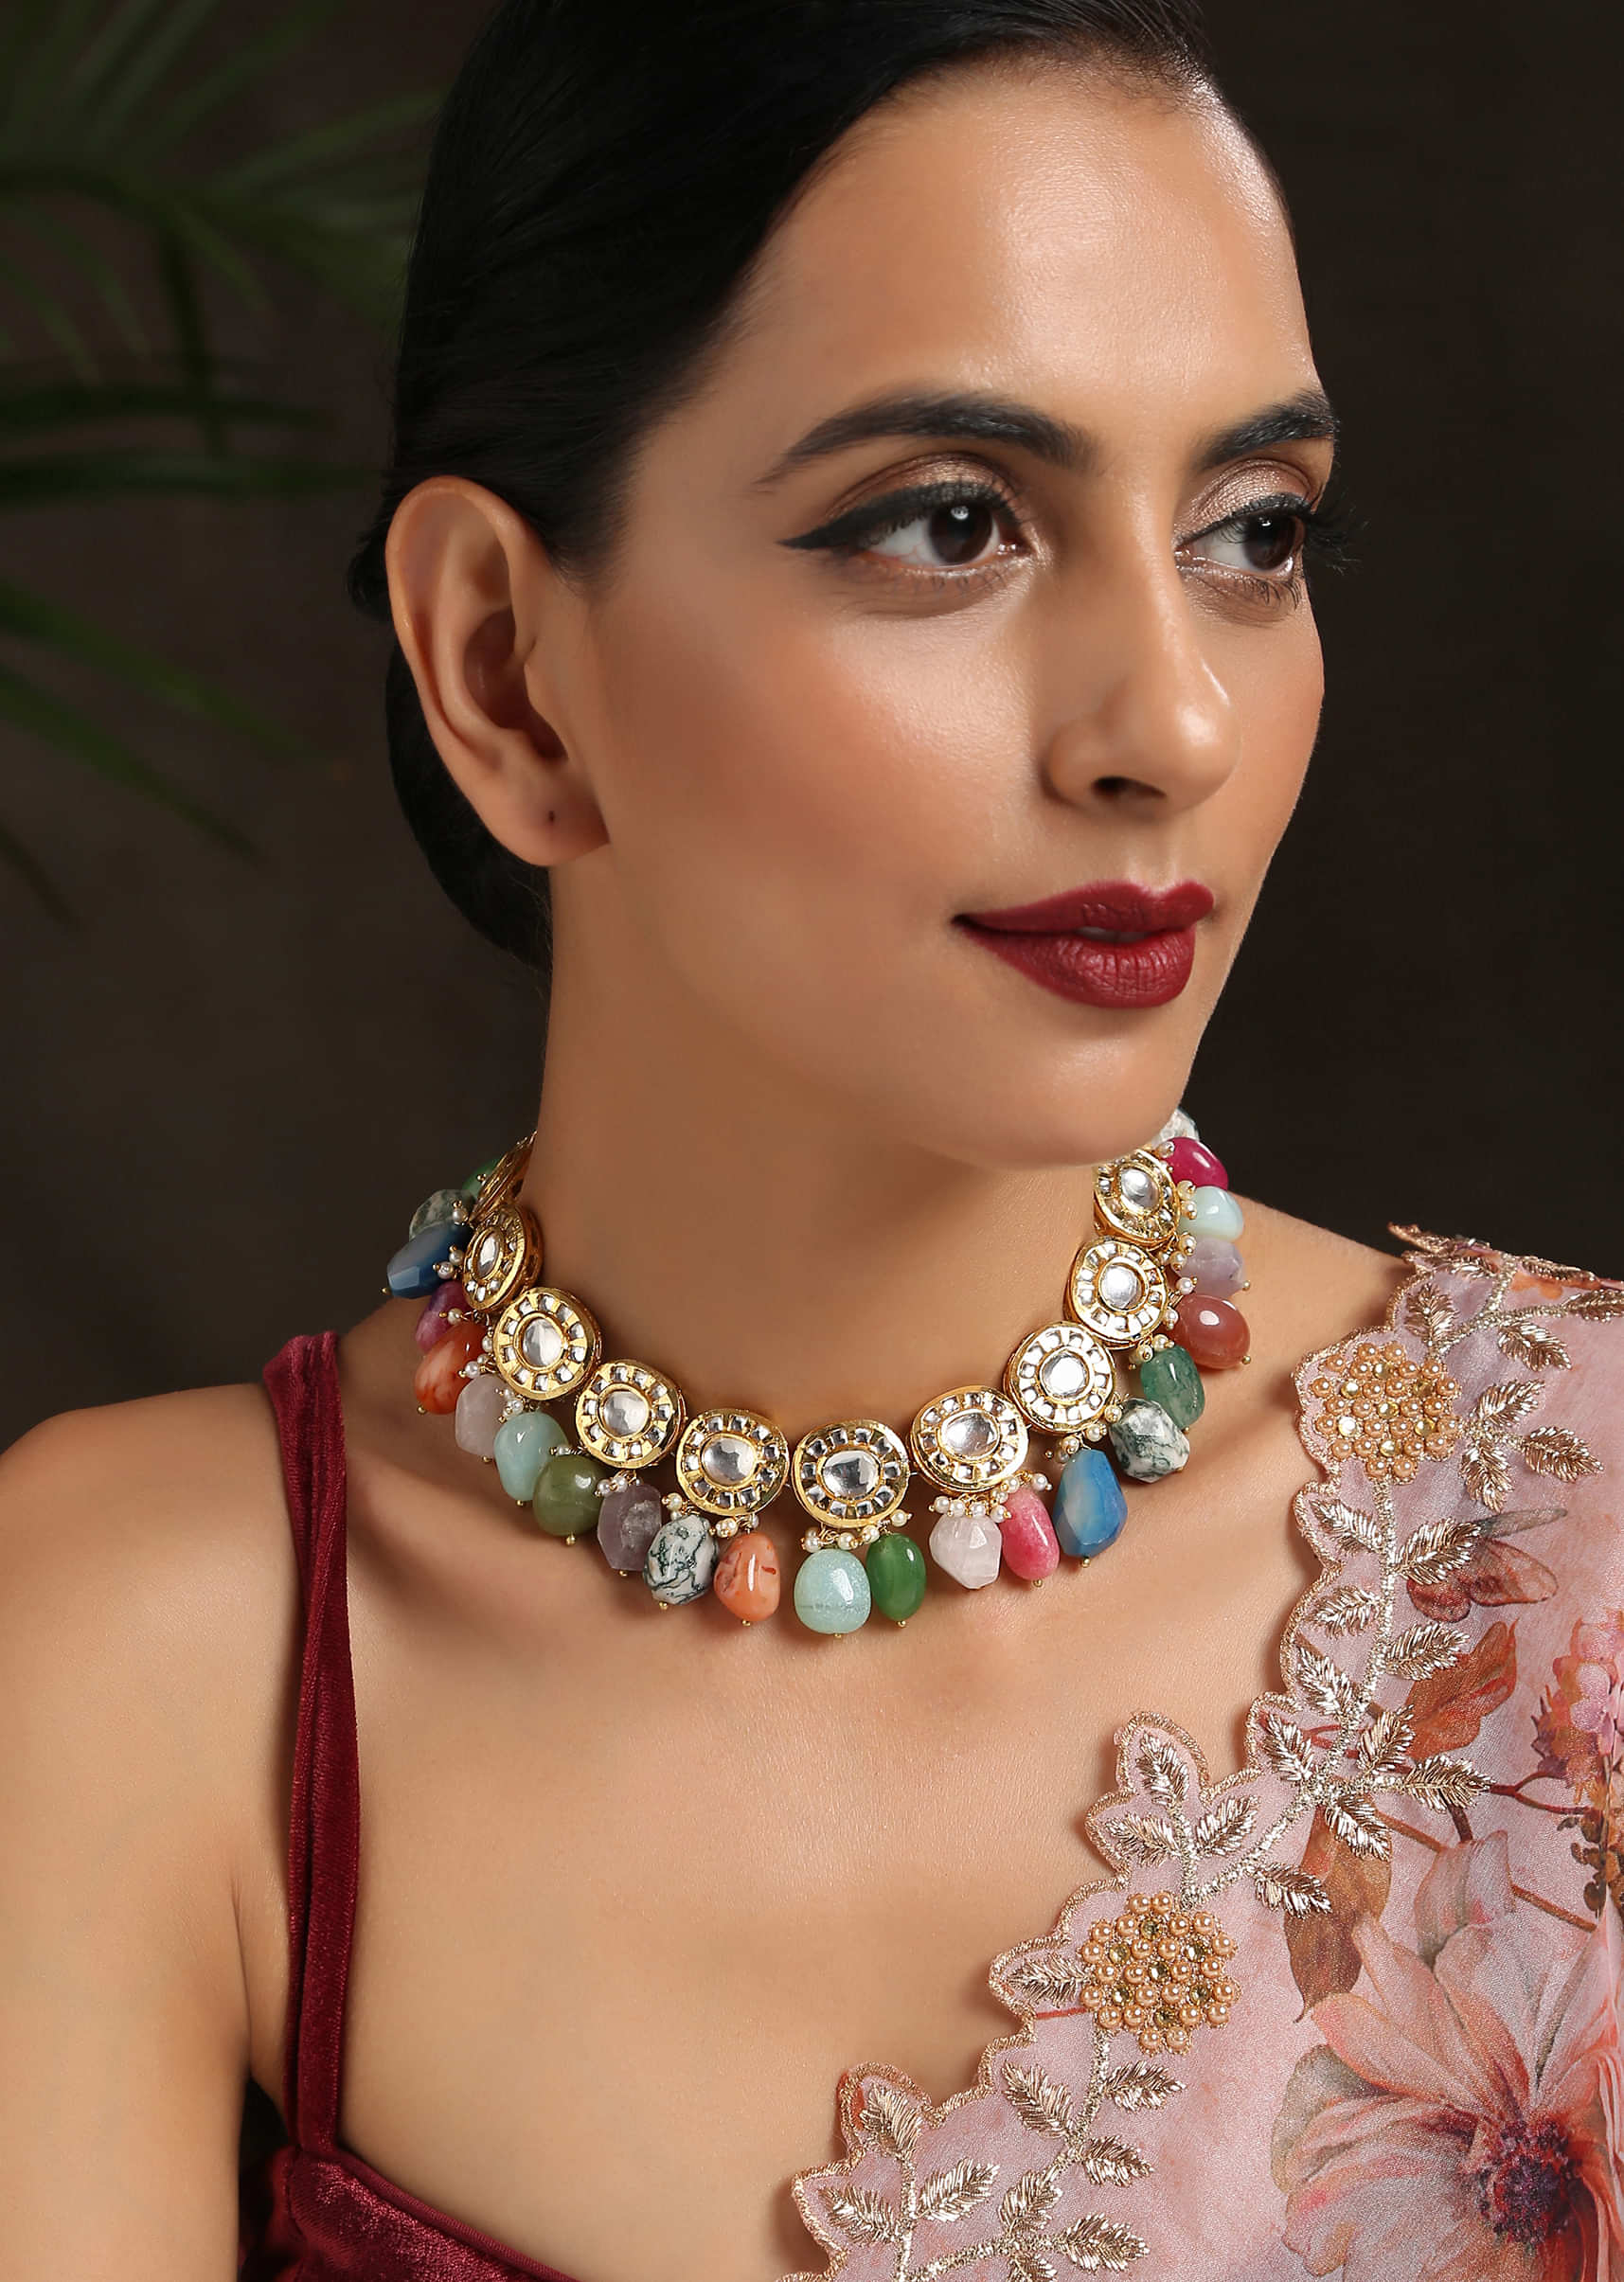 Gold Choker Necklace With Navratna Stones Dangling From Classy Kundan Design By Paisley Pop